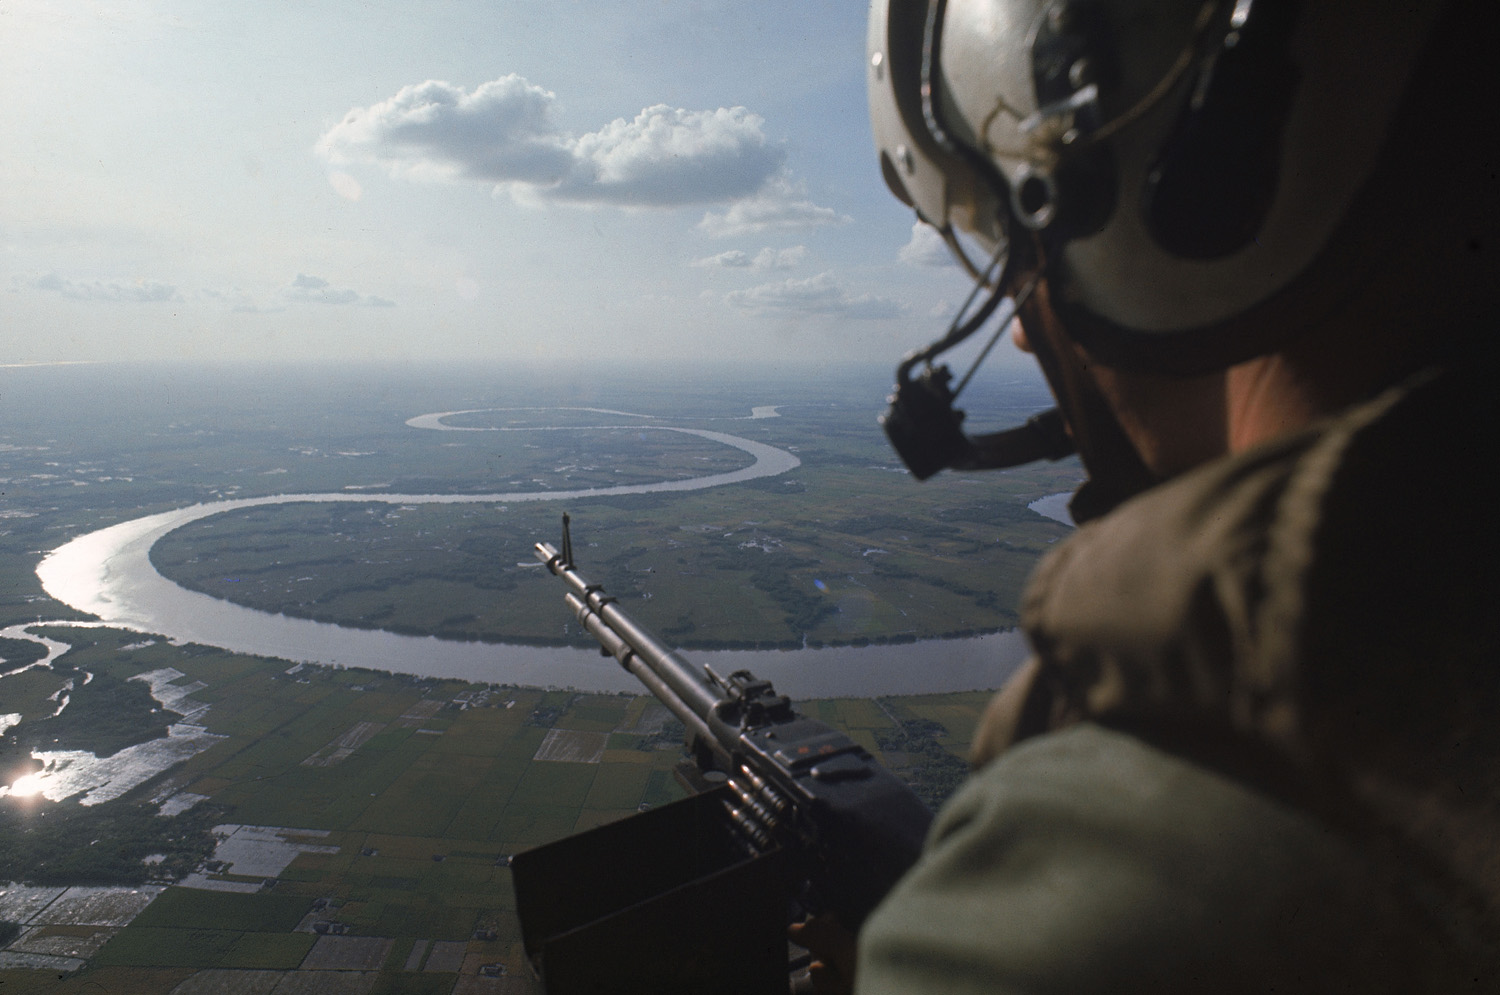 Machine gunner in helicopter on patrol over the Mekong Delta in 1967.